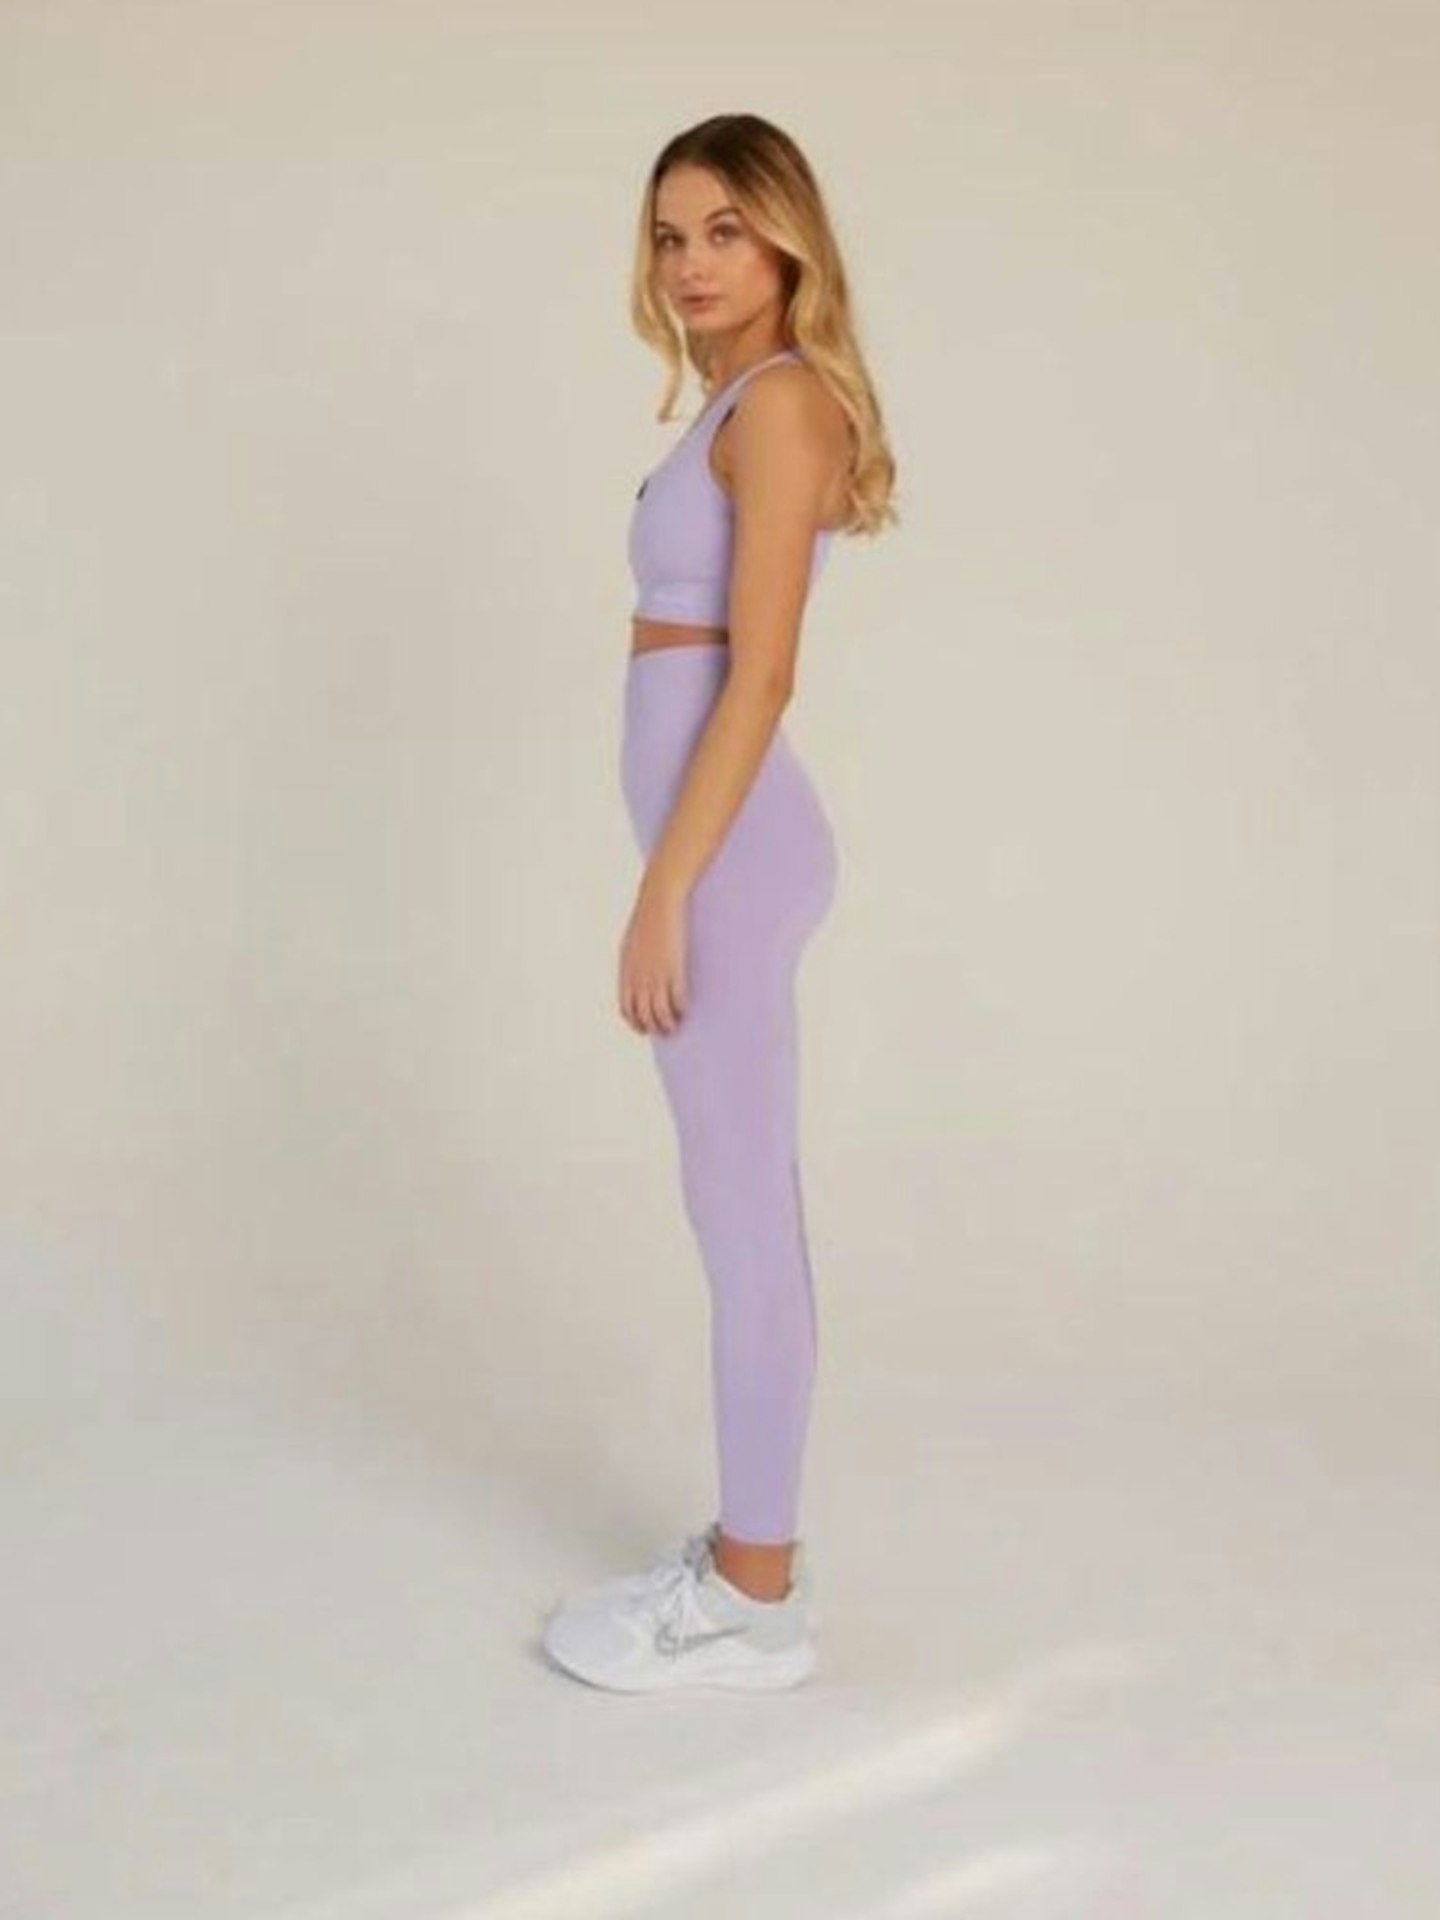 TALA Zinnia High Waisted Leggings in Purple - Exclusive To ASOS